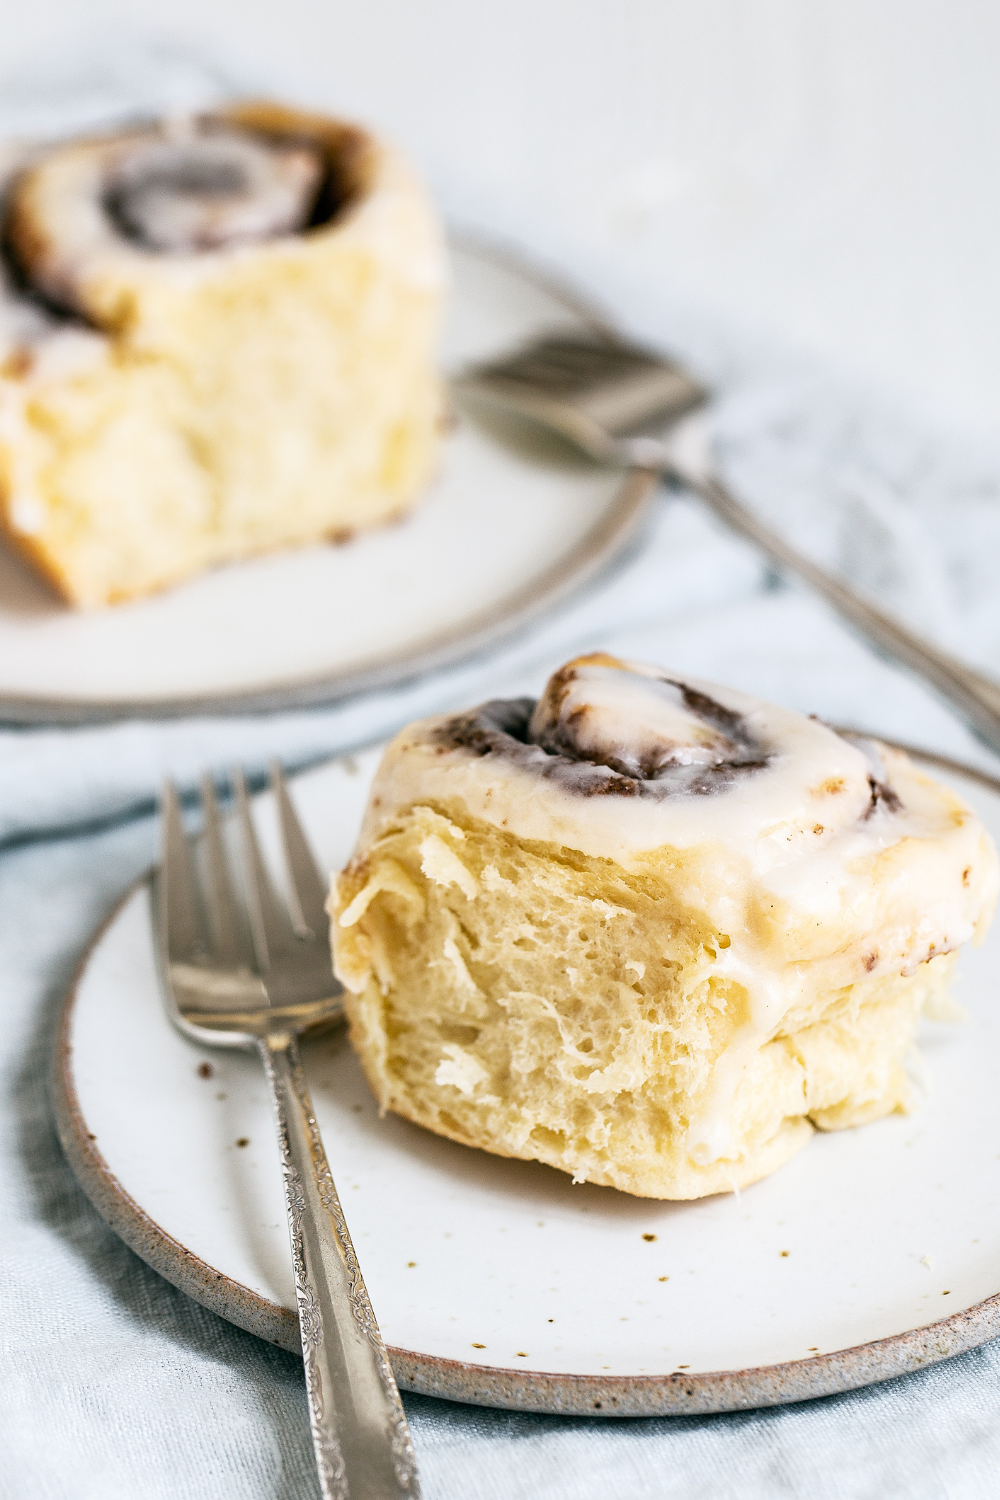 two cinnamon rolls sitting on plates with forks, ready to serve.